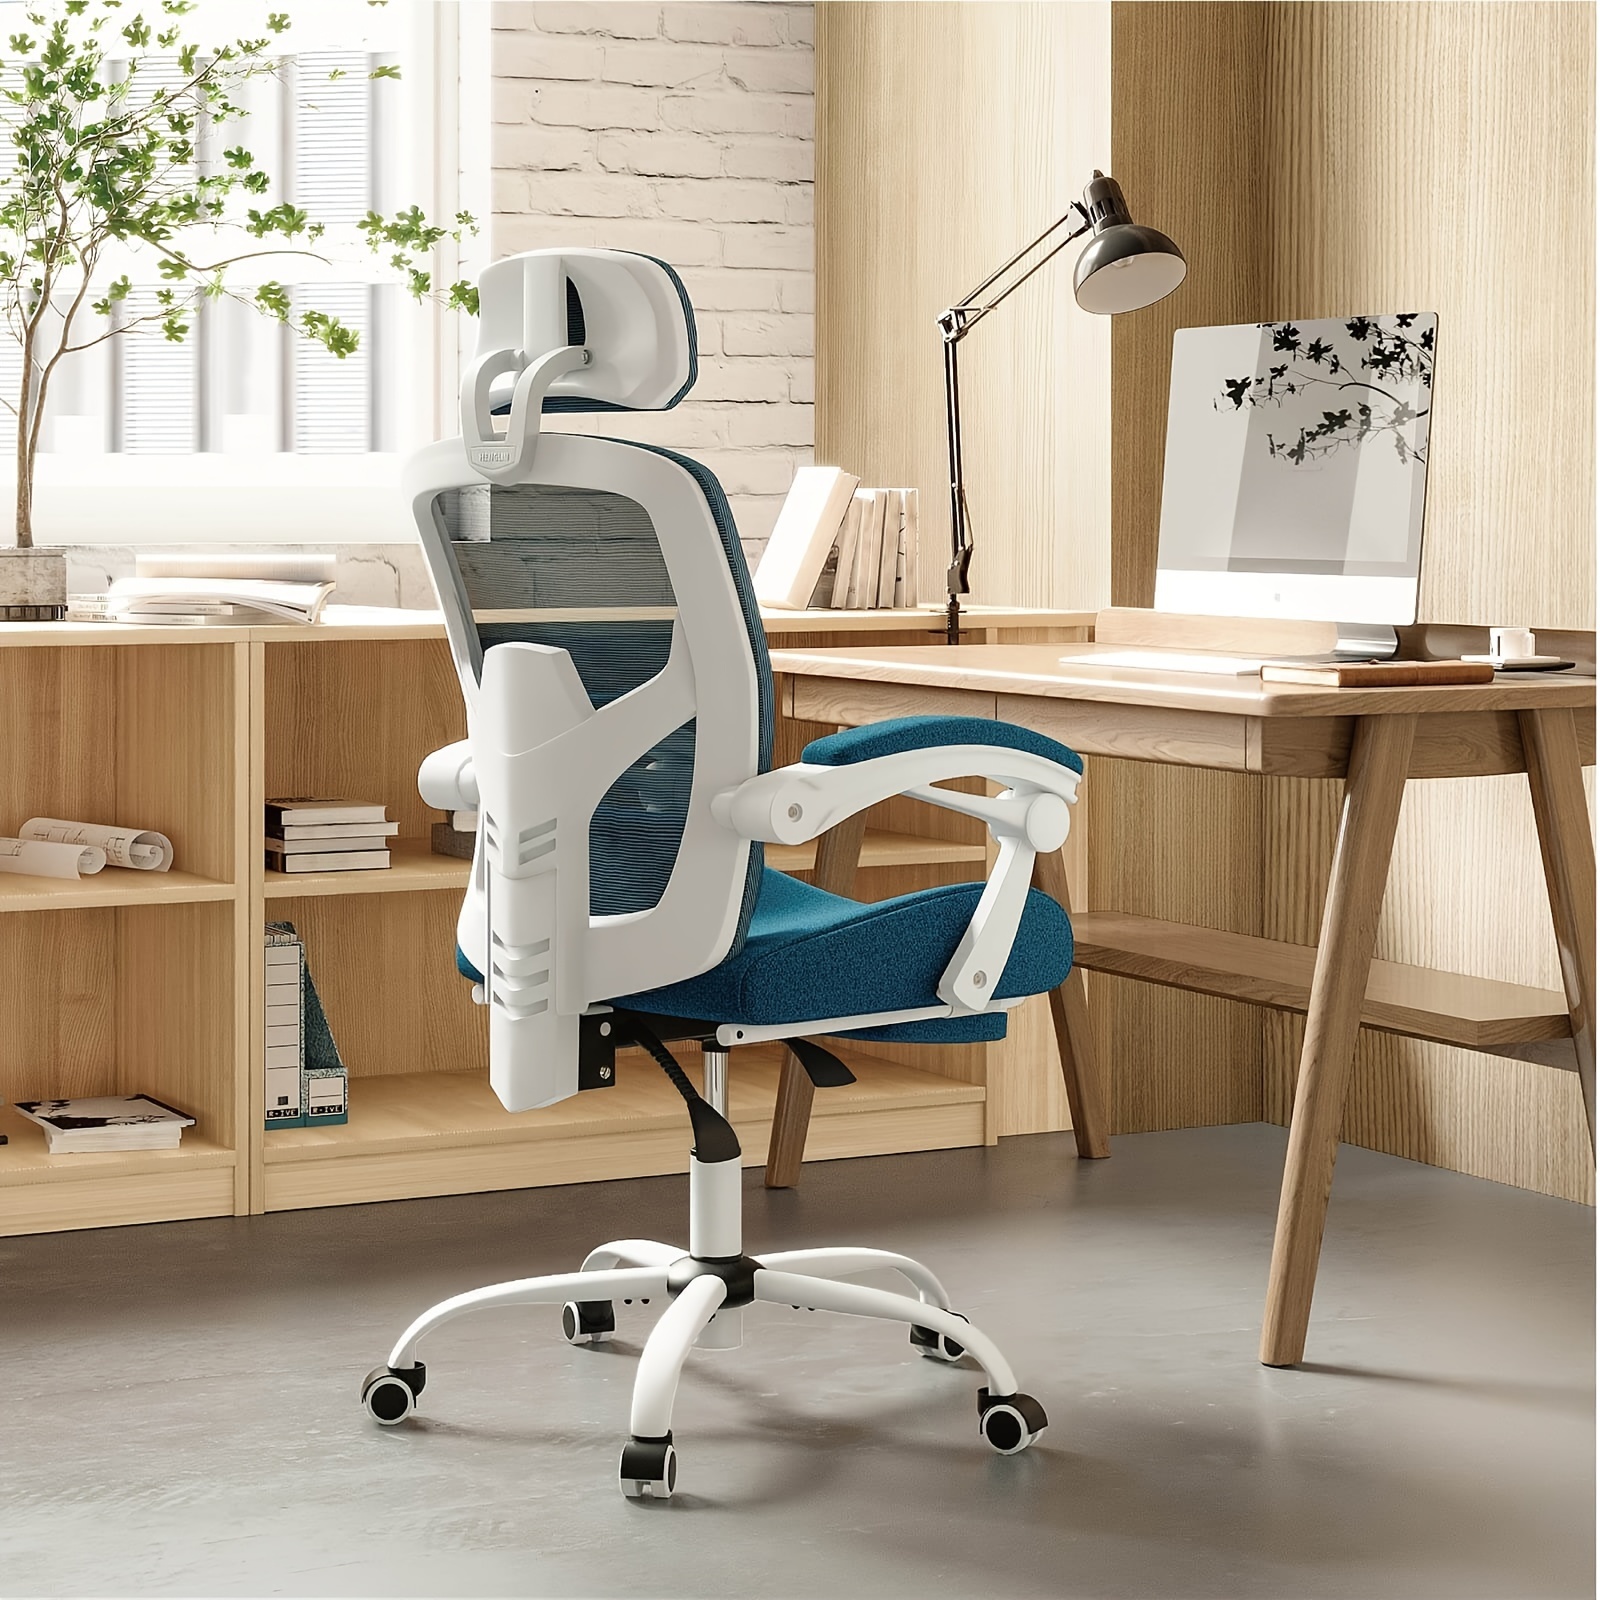 

Ergonomic Office Chair, Reclining High Back Mesh Computer Desk Swivel Rolling Home Task Chair With Lumbar Support Pillow, Adjustable Headrest, Retractable Footrest And Padded Armrests